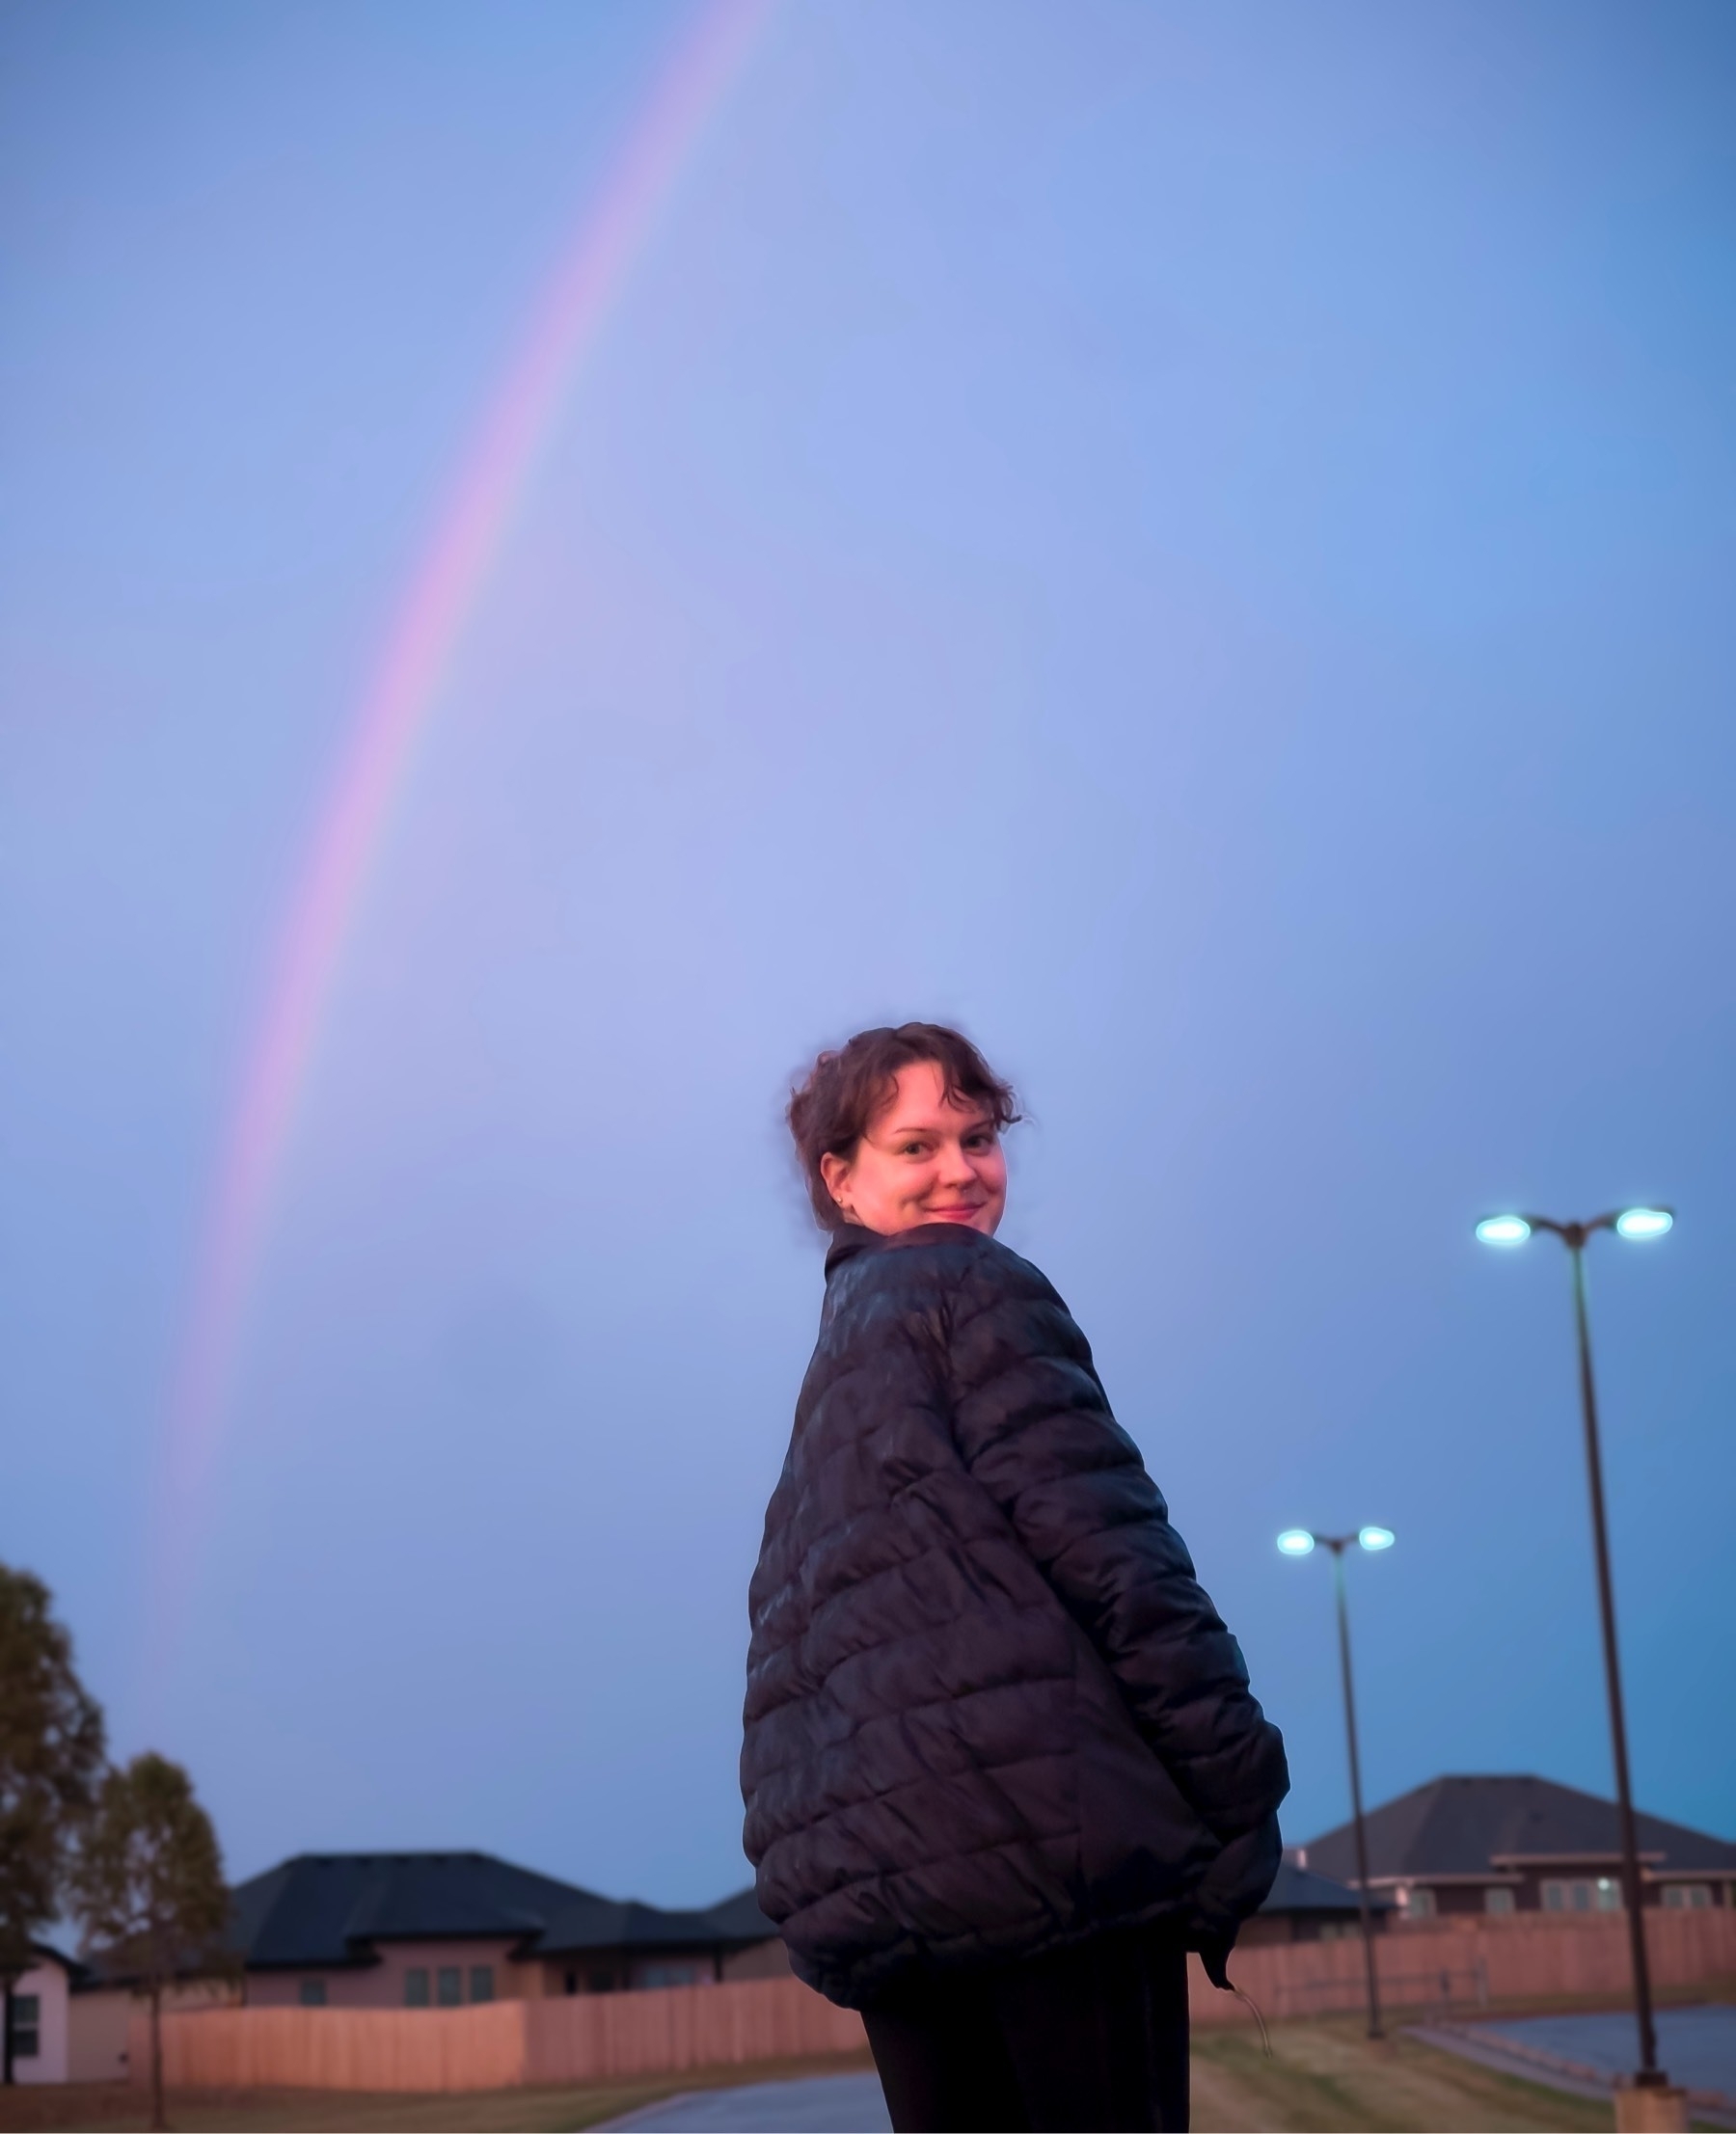 Young woman turned back to look at camera beneath a dusk rainbow.